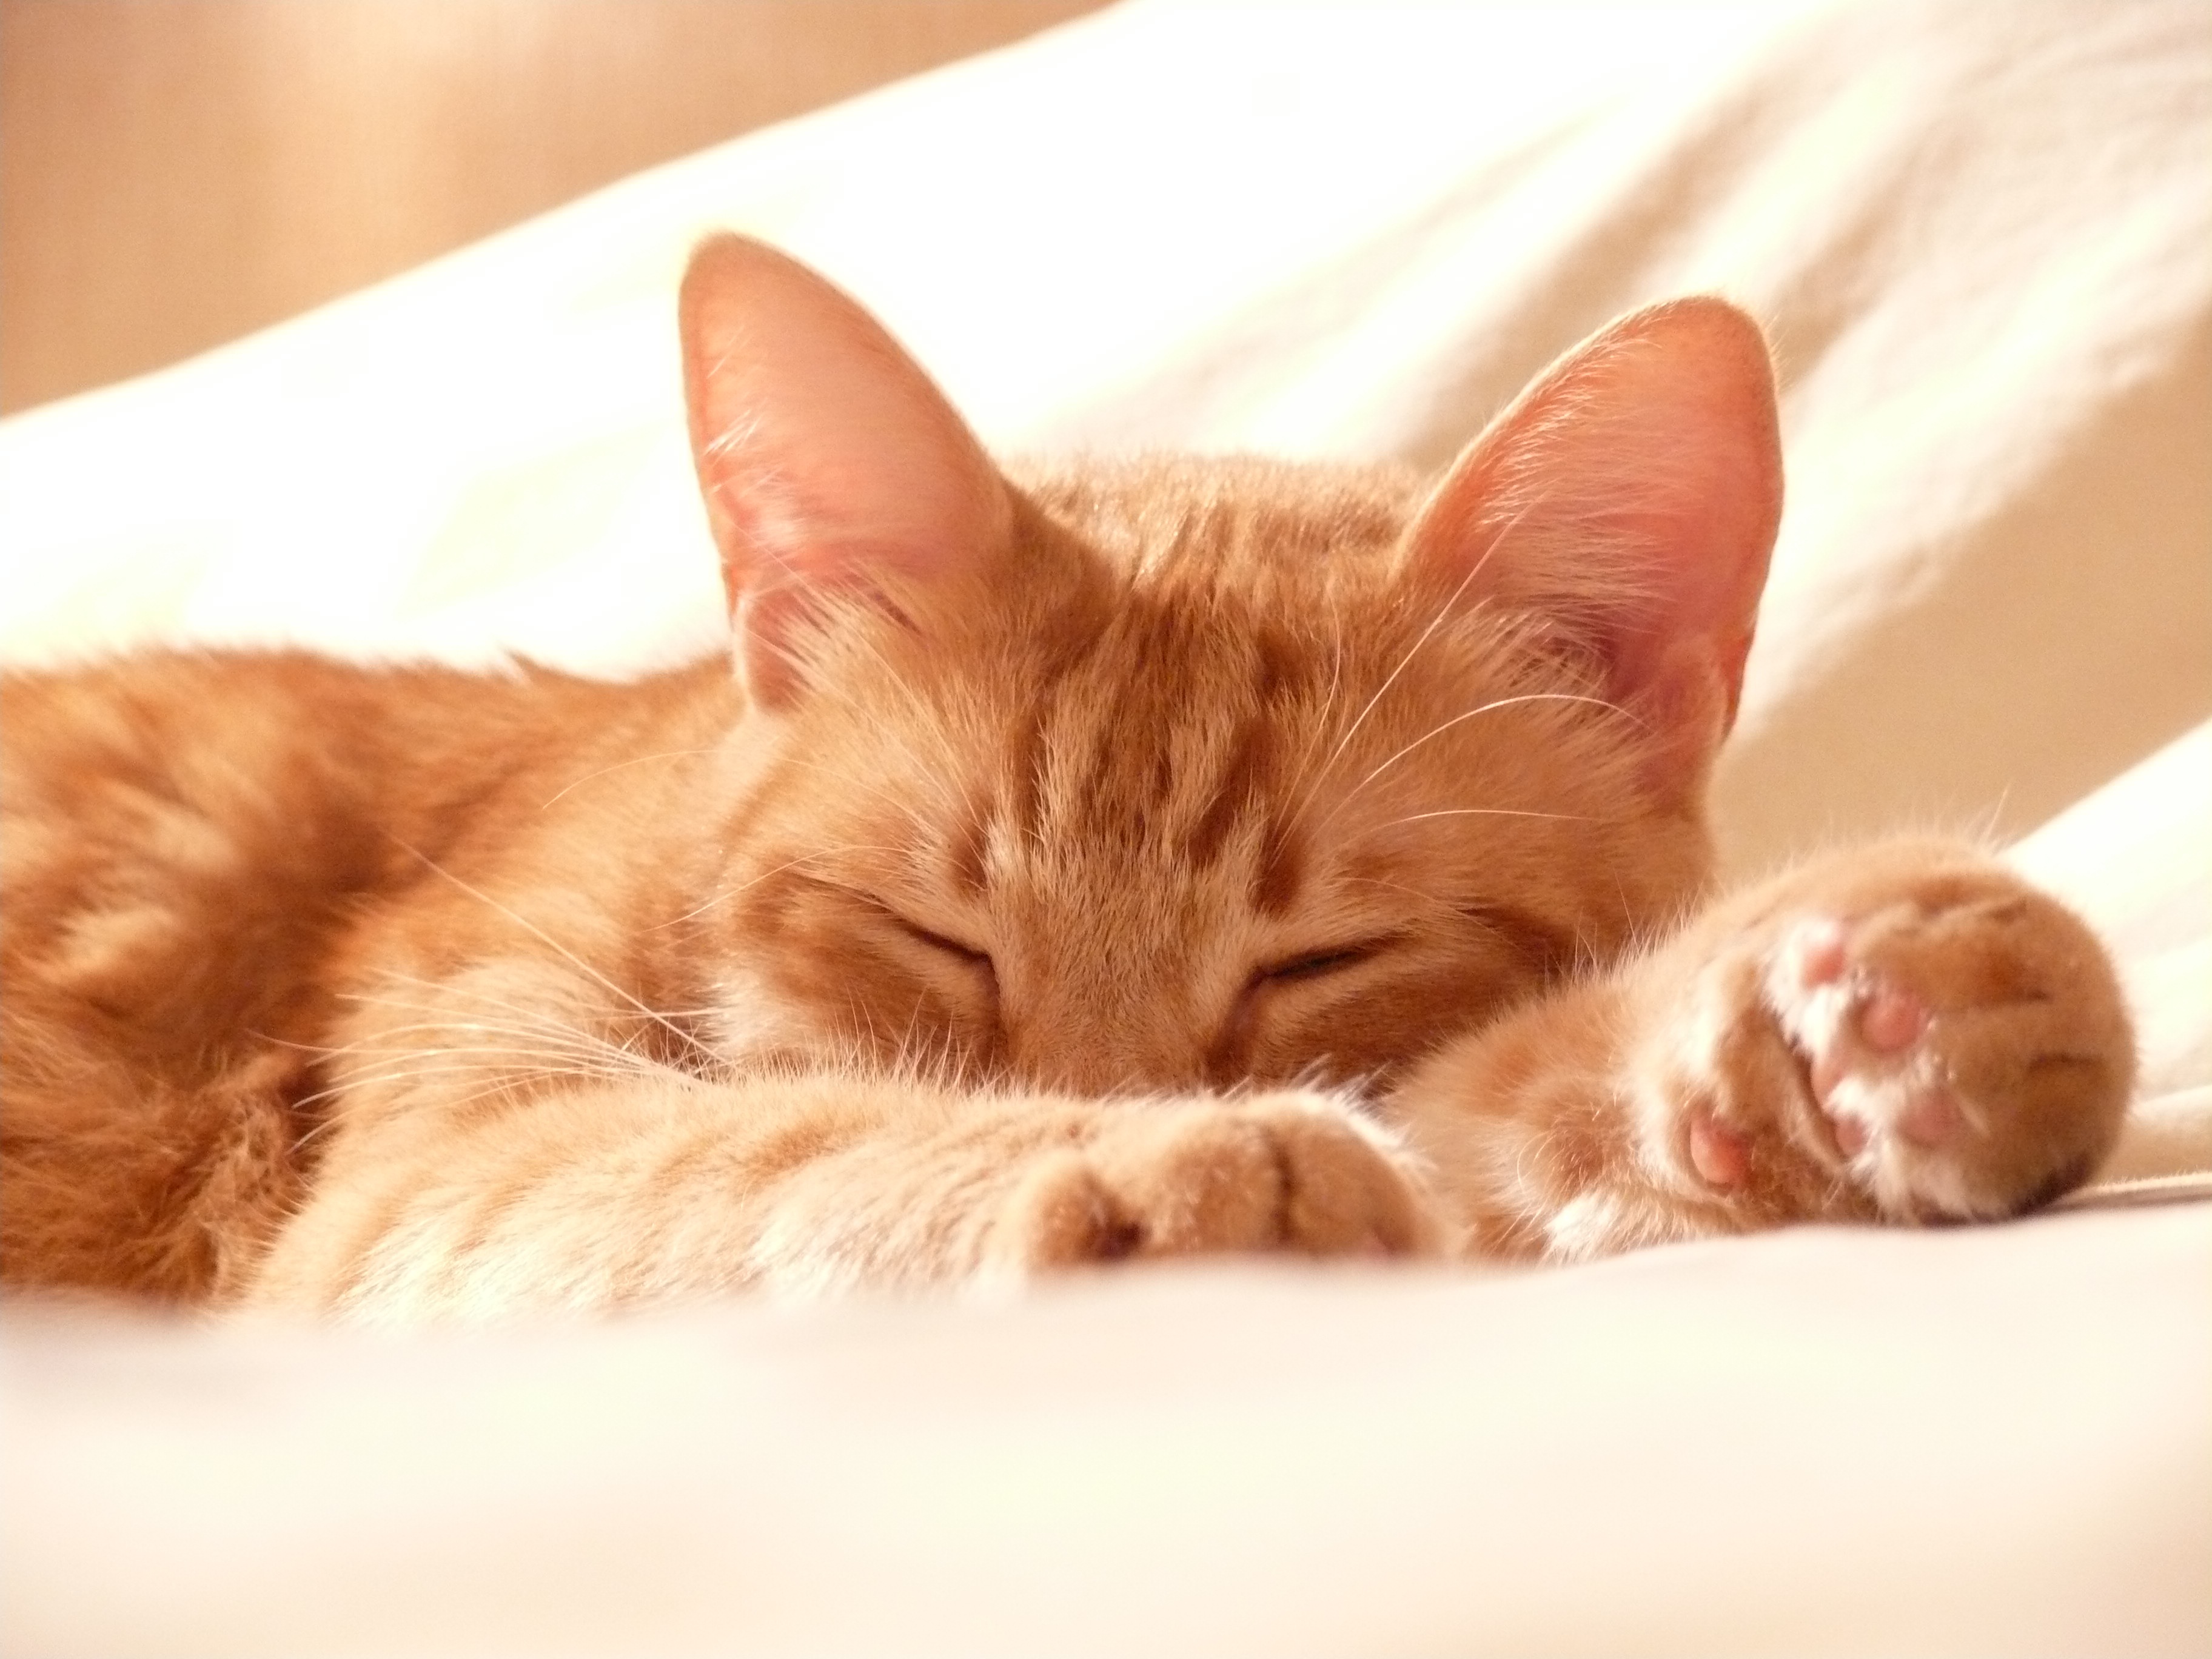 64568 download wallpaper cat, animals, muzzle, sleep, dream, paws screensavers and pictures for free